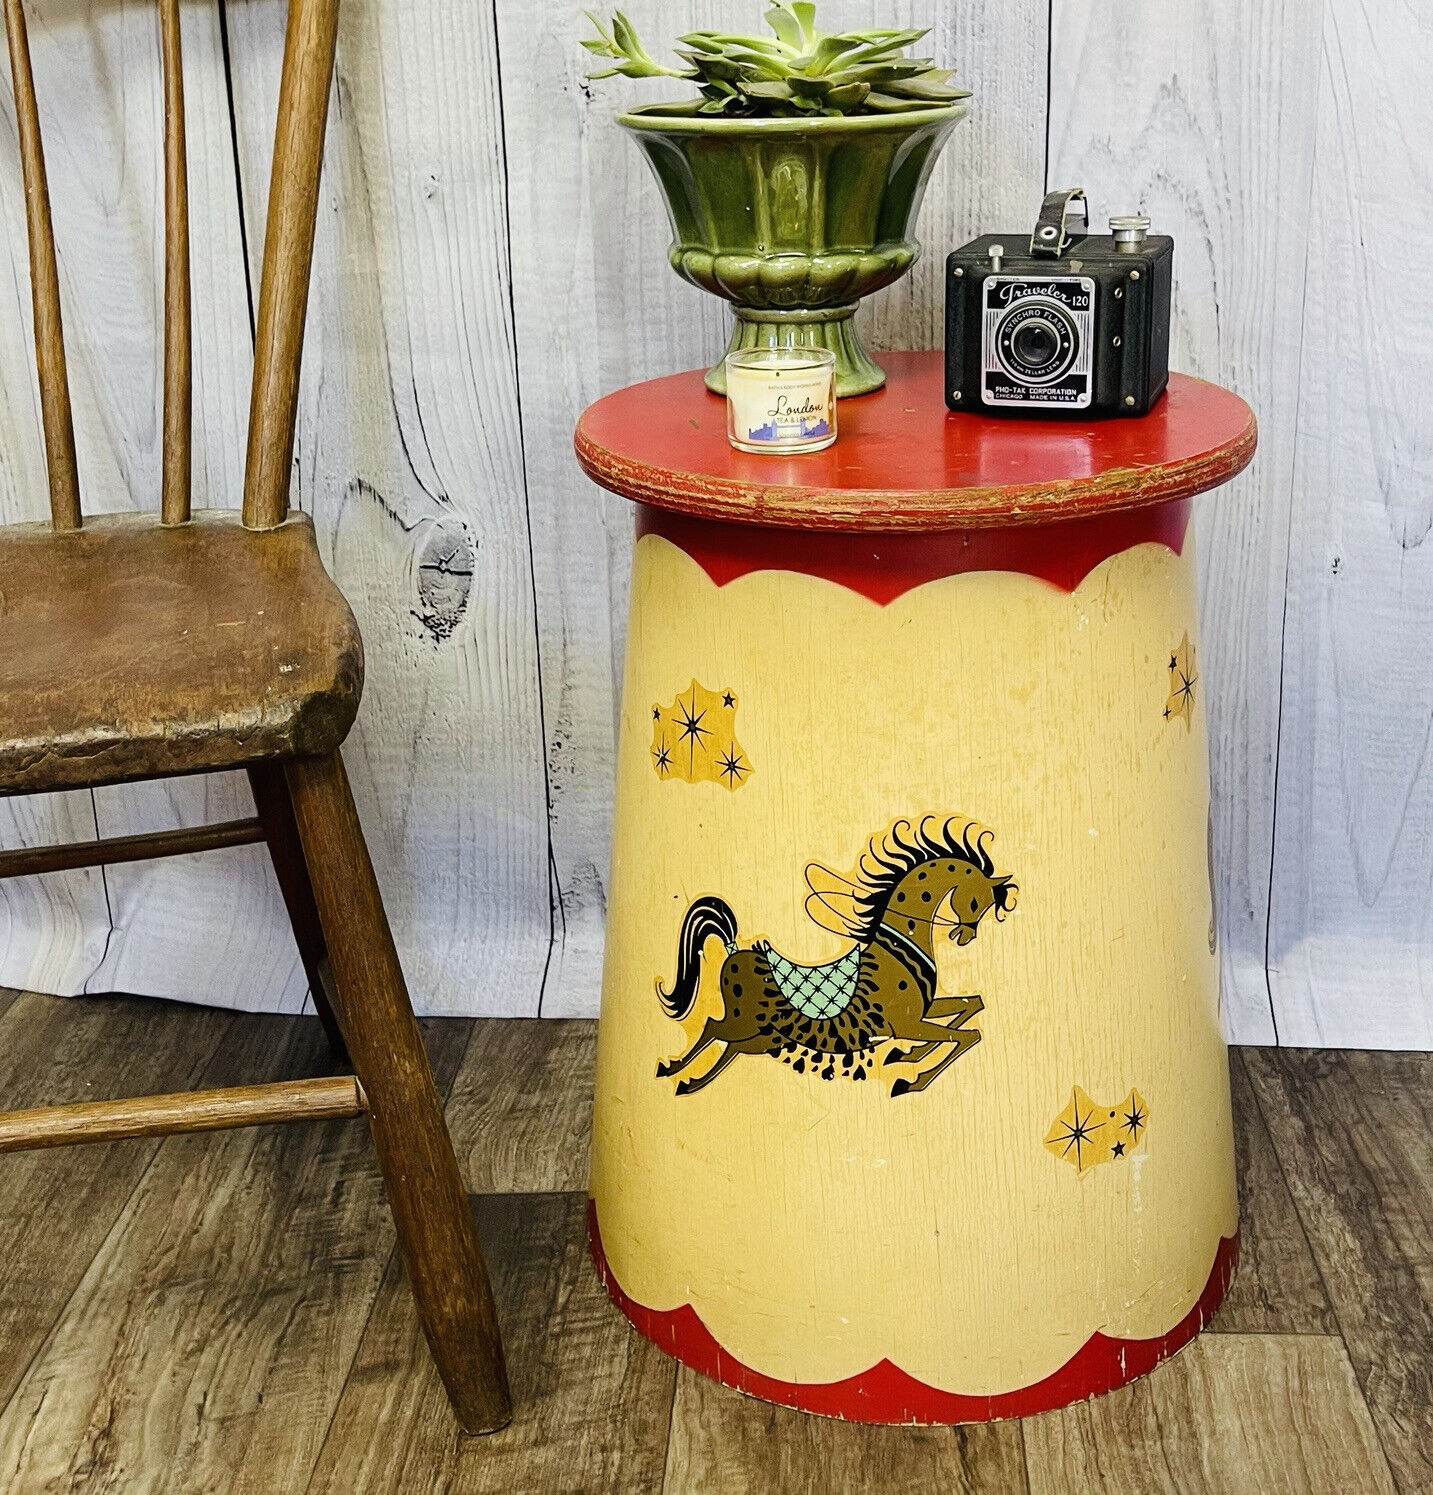 Vintage Atomic MCM Bentwood Side Accent Table Circus Star Show Horses Decals